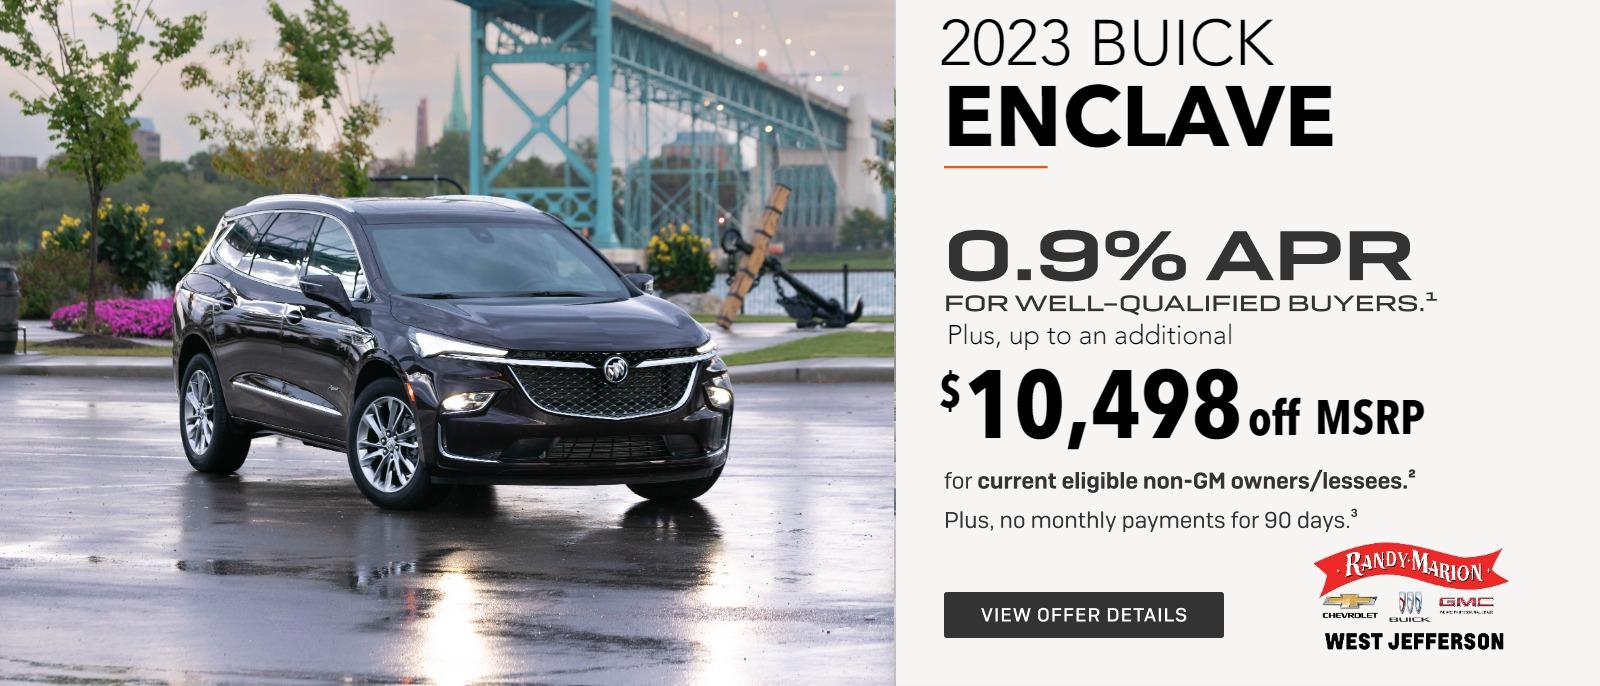 SAVE BIG ON 2023 BUICK ENCLAVE MODELS AT RANDY MARION CHEVROLET BUICK GMC OF WEST JEFFERSON